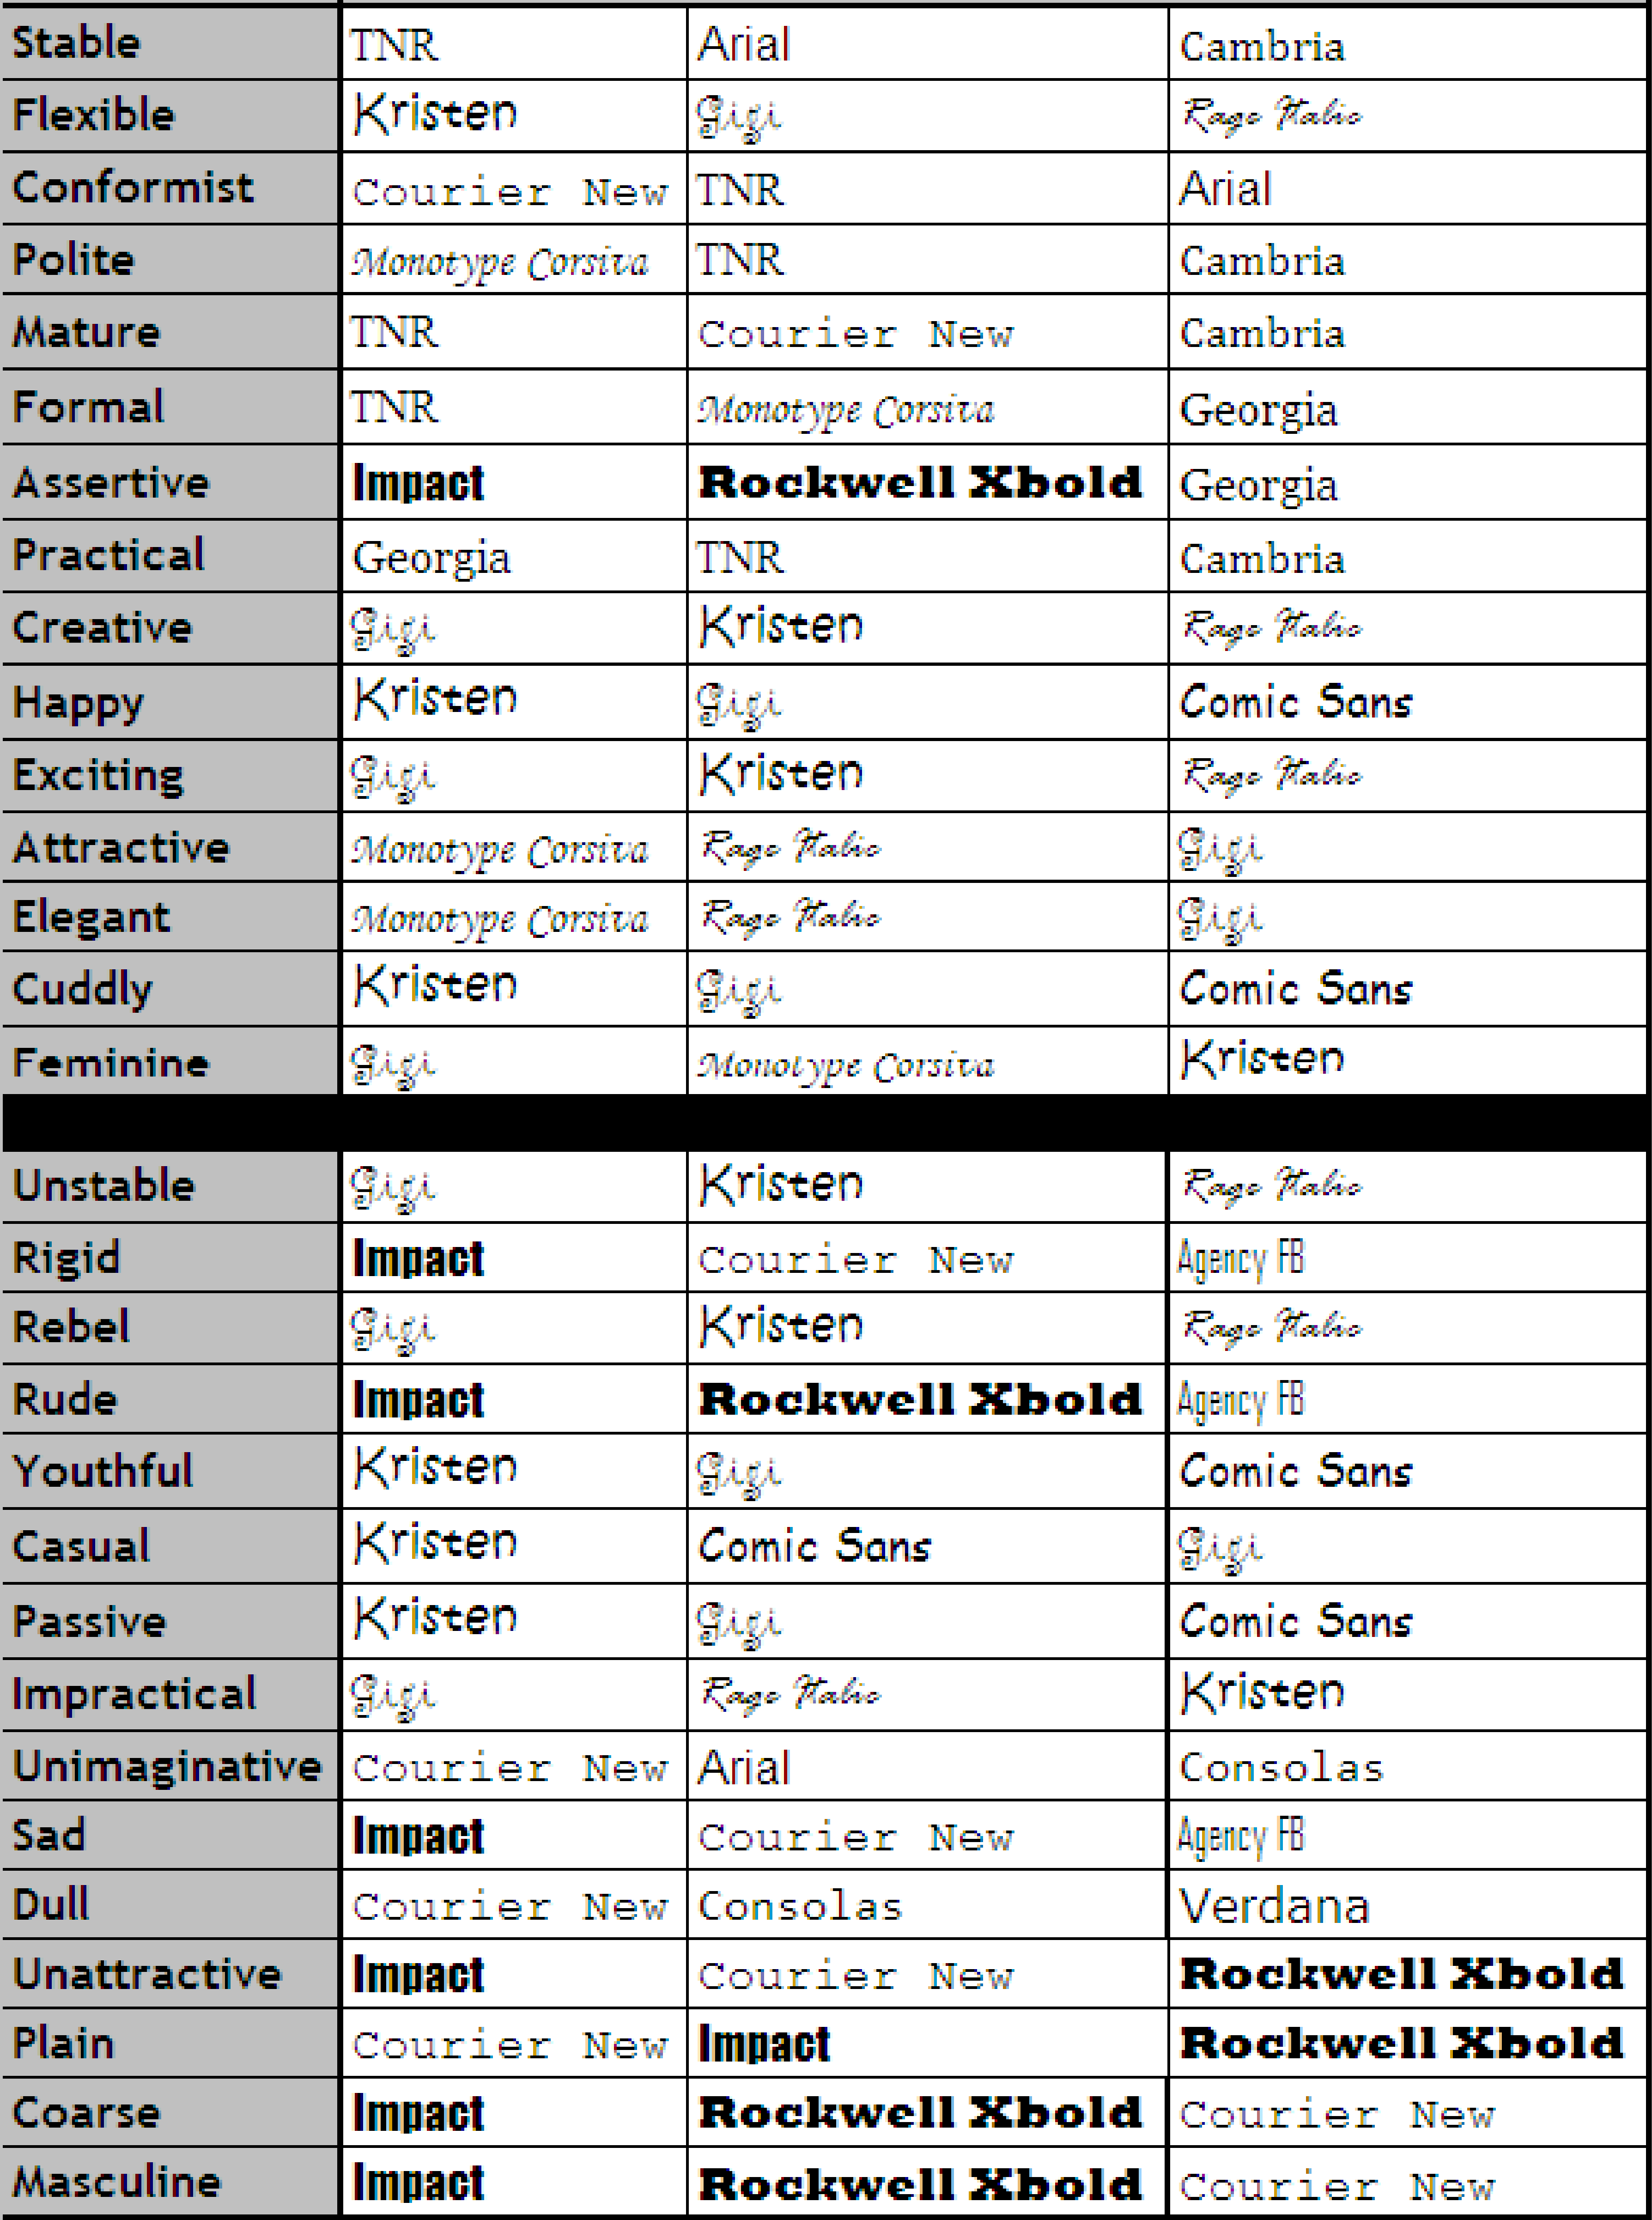 The table from the paper by Shaikh et. al. showing the fonts
associated with each personality.